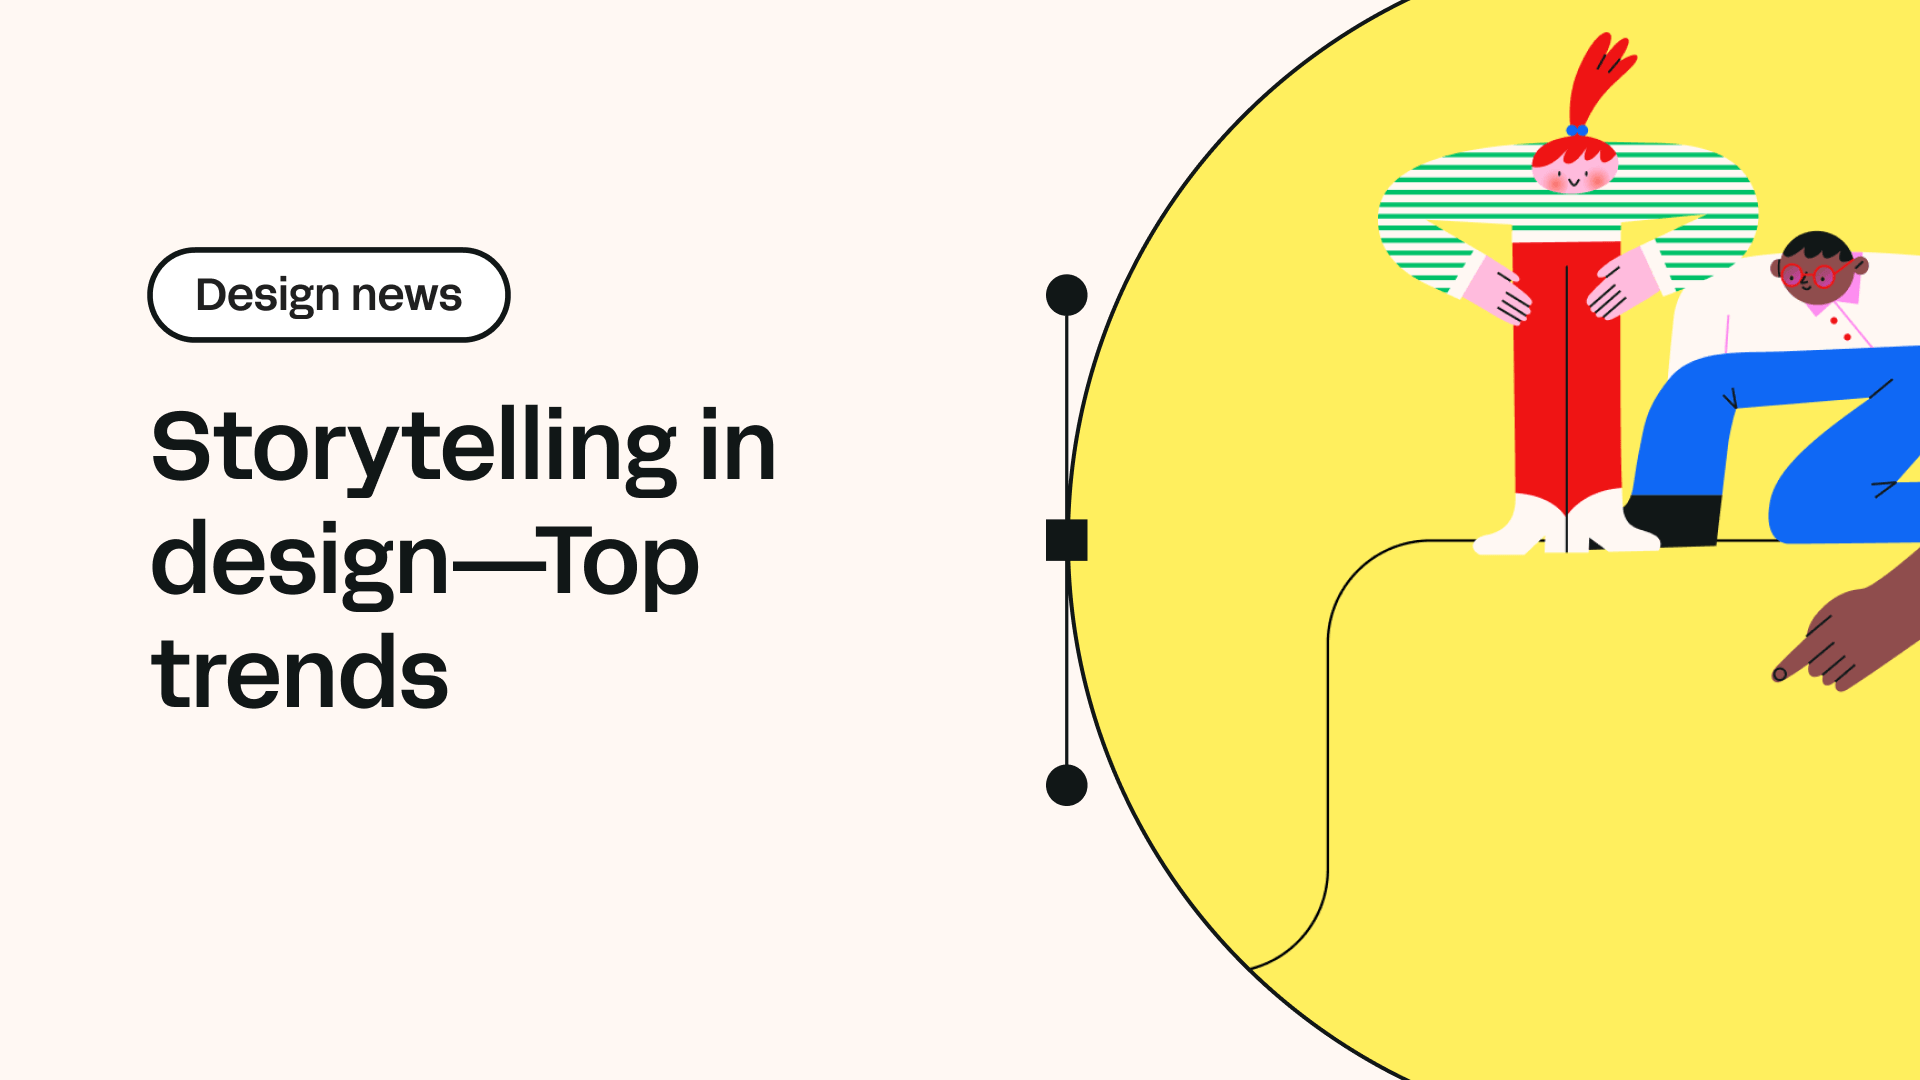 Storytelling in design—Top trends by Linearity Curve